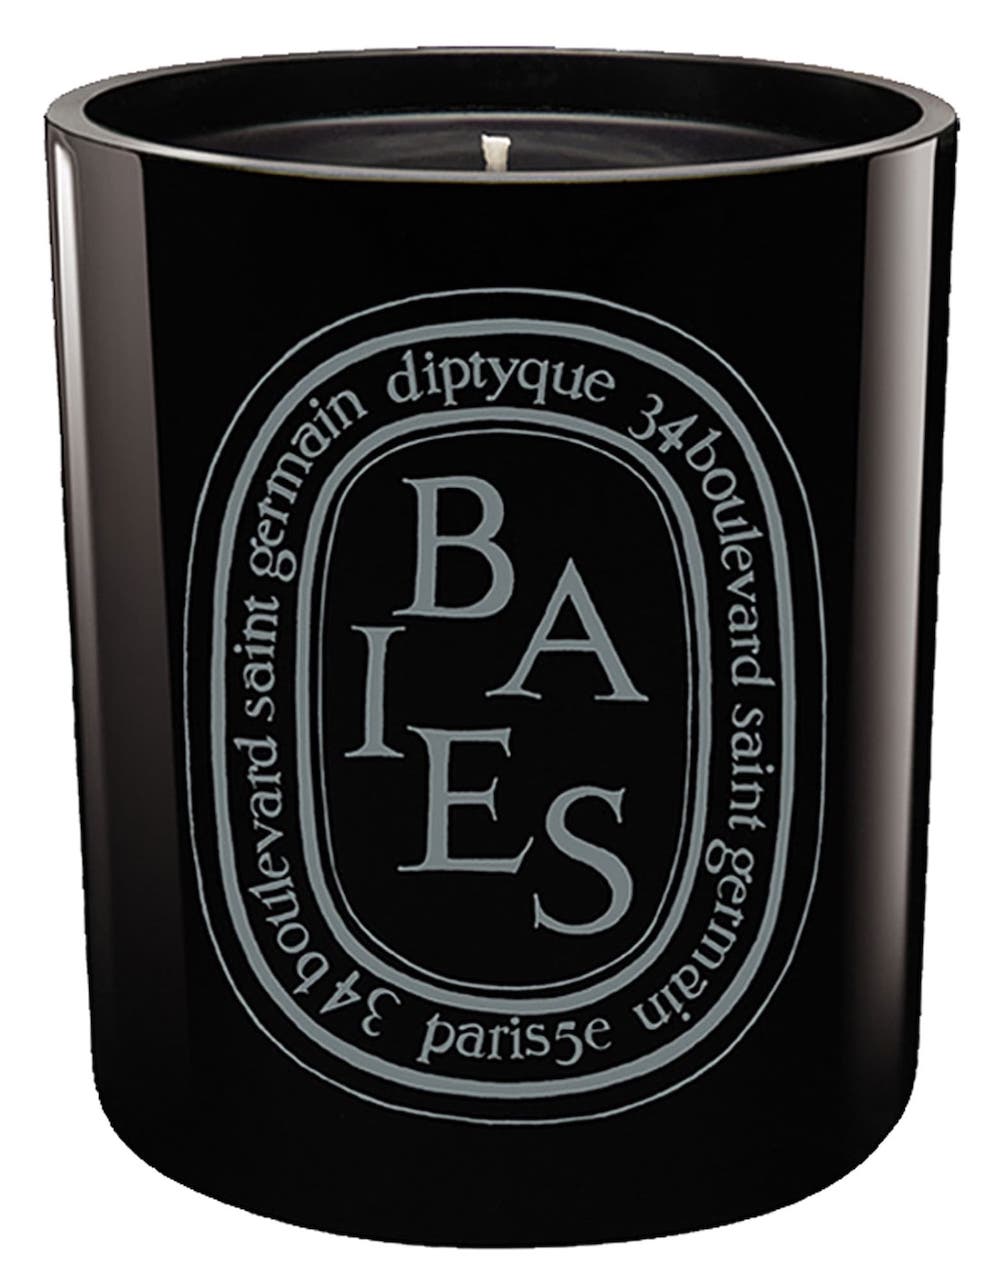 Diptyque 'Baies:Berries' Scented Black Candle